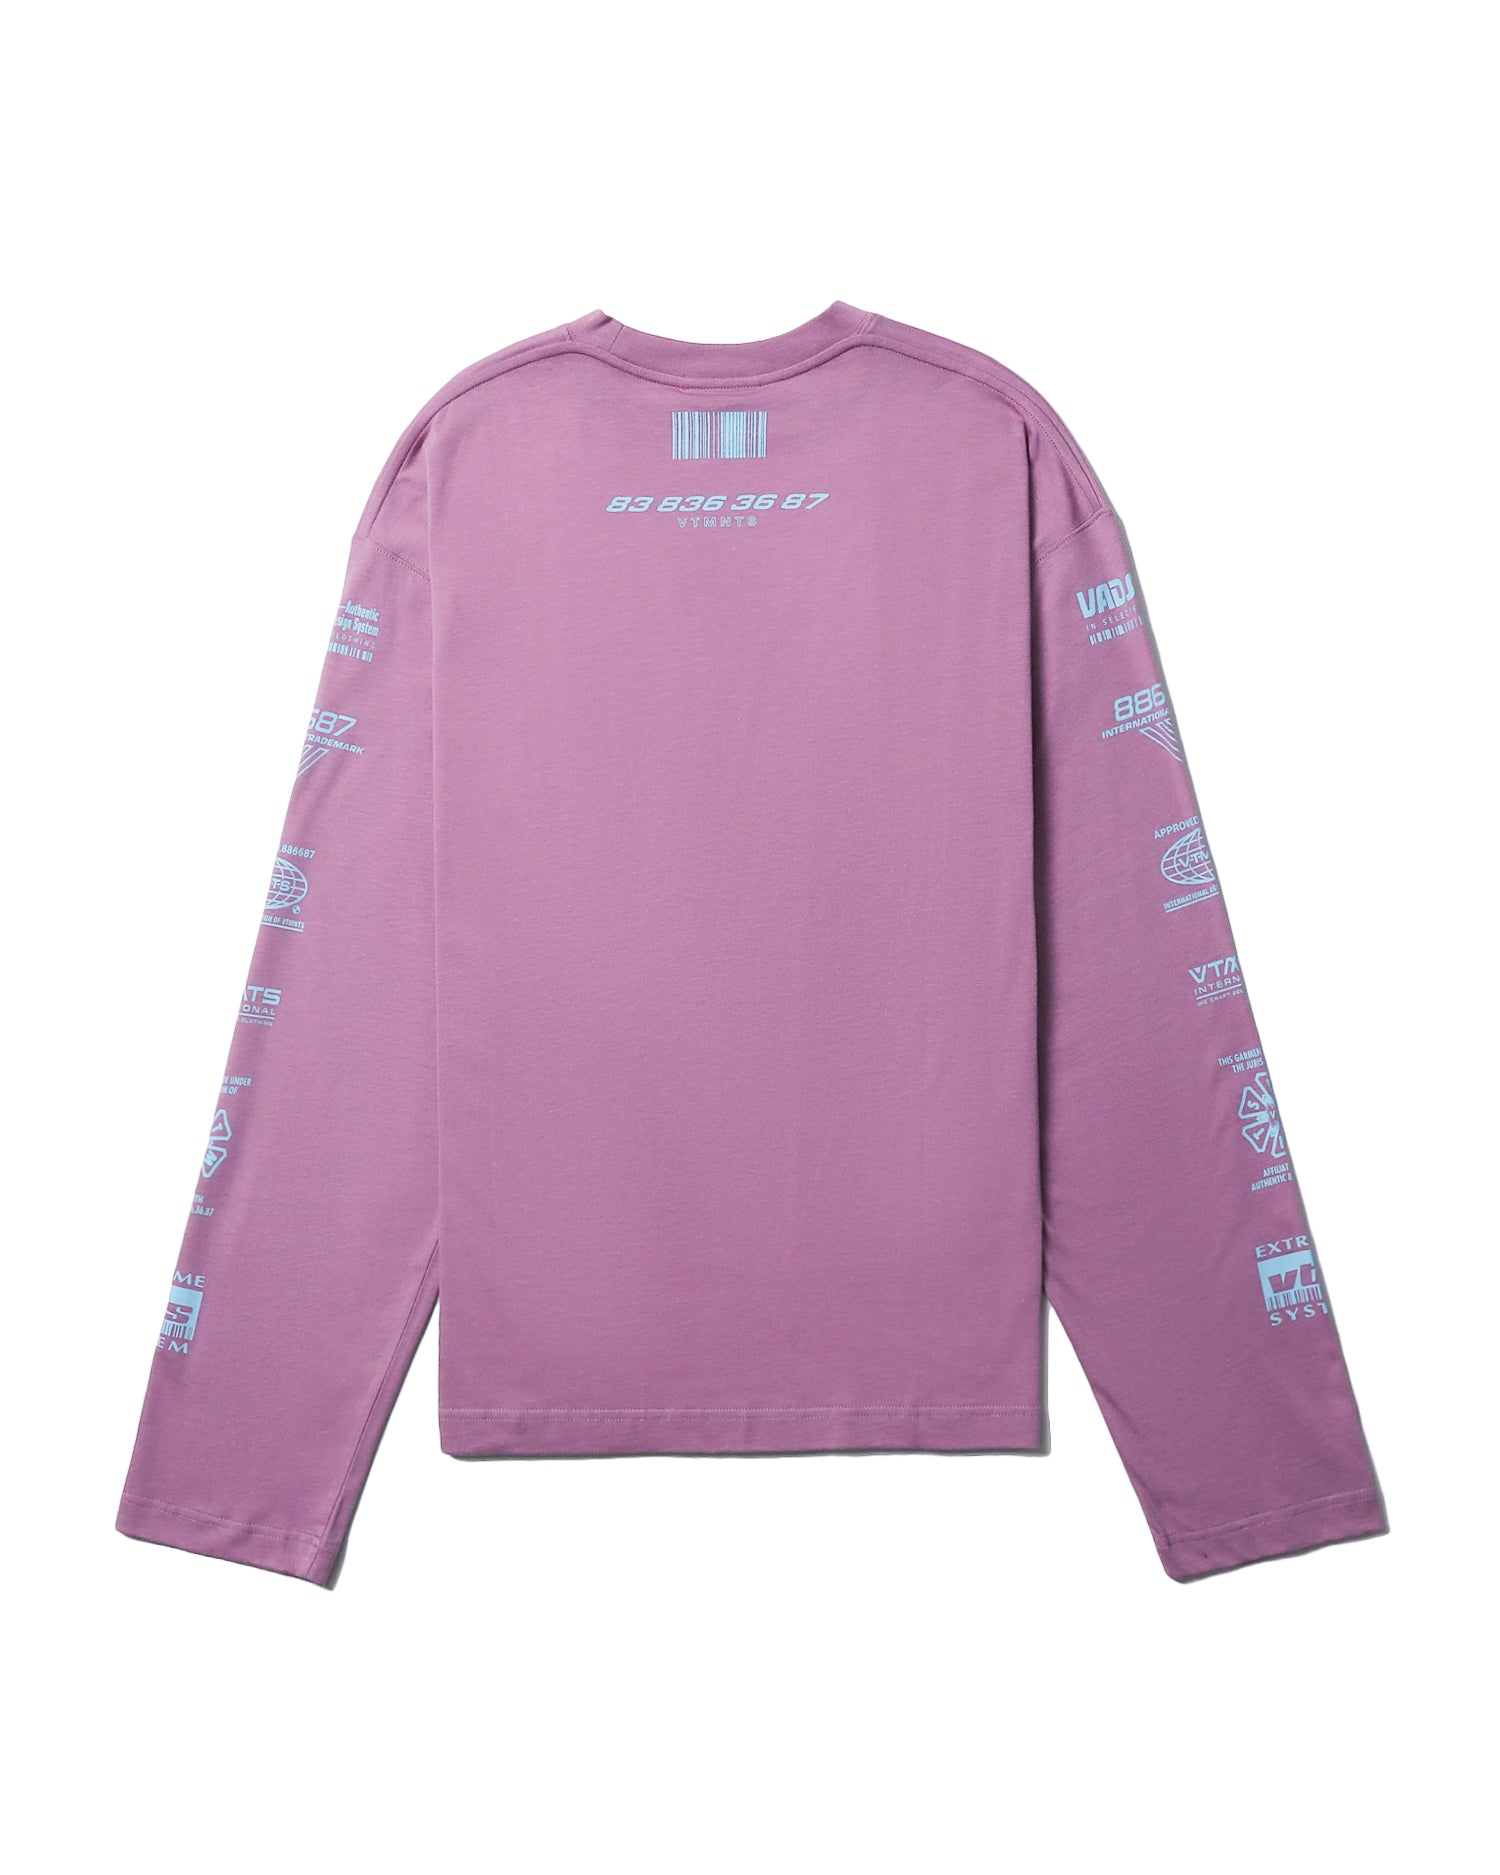 VTMNTS All rights reserved long sleeve tee – Airdrobe